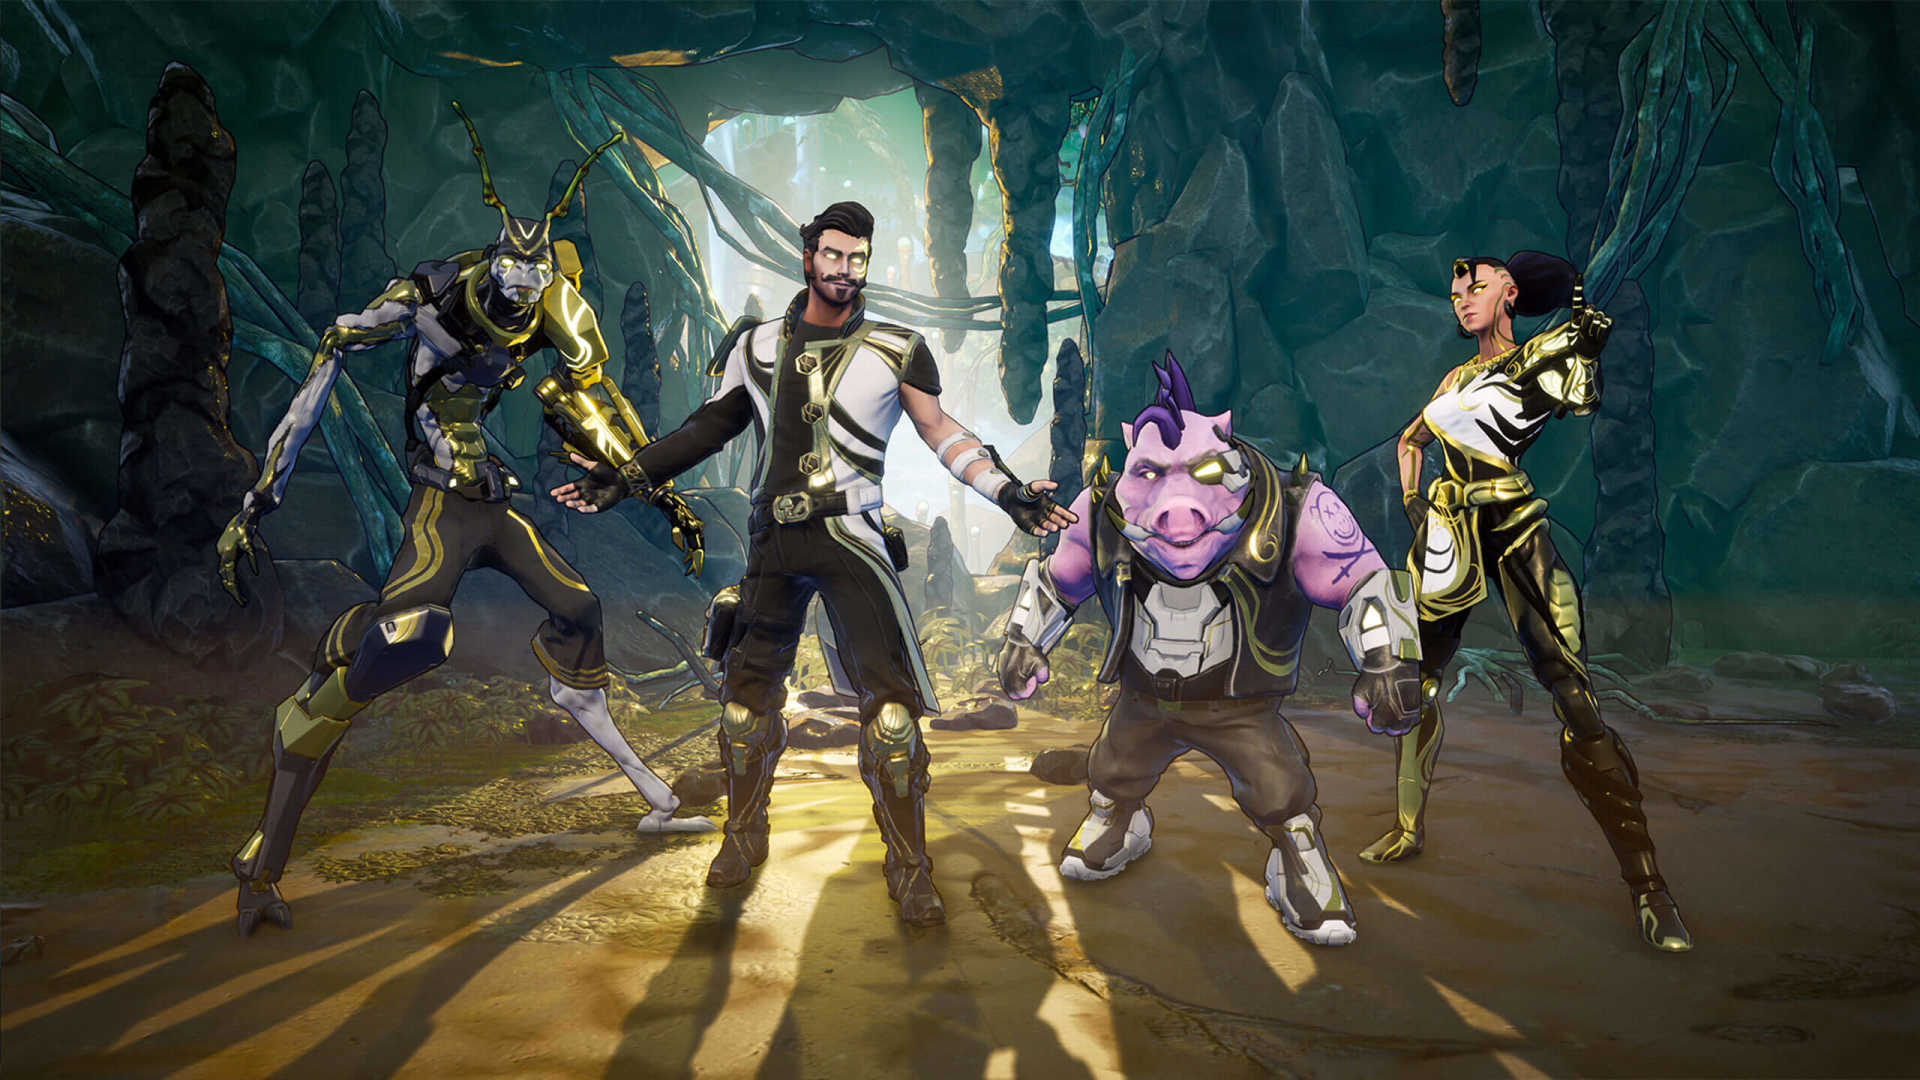  Runescape developer shutters sci-fi looter-shooter and issues refunds across the board 